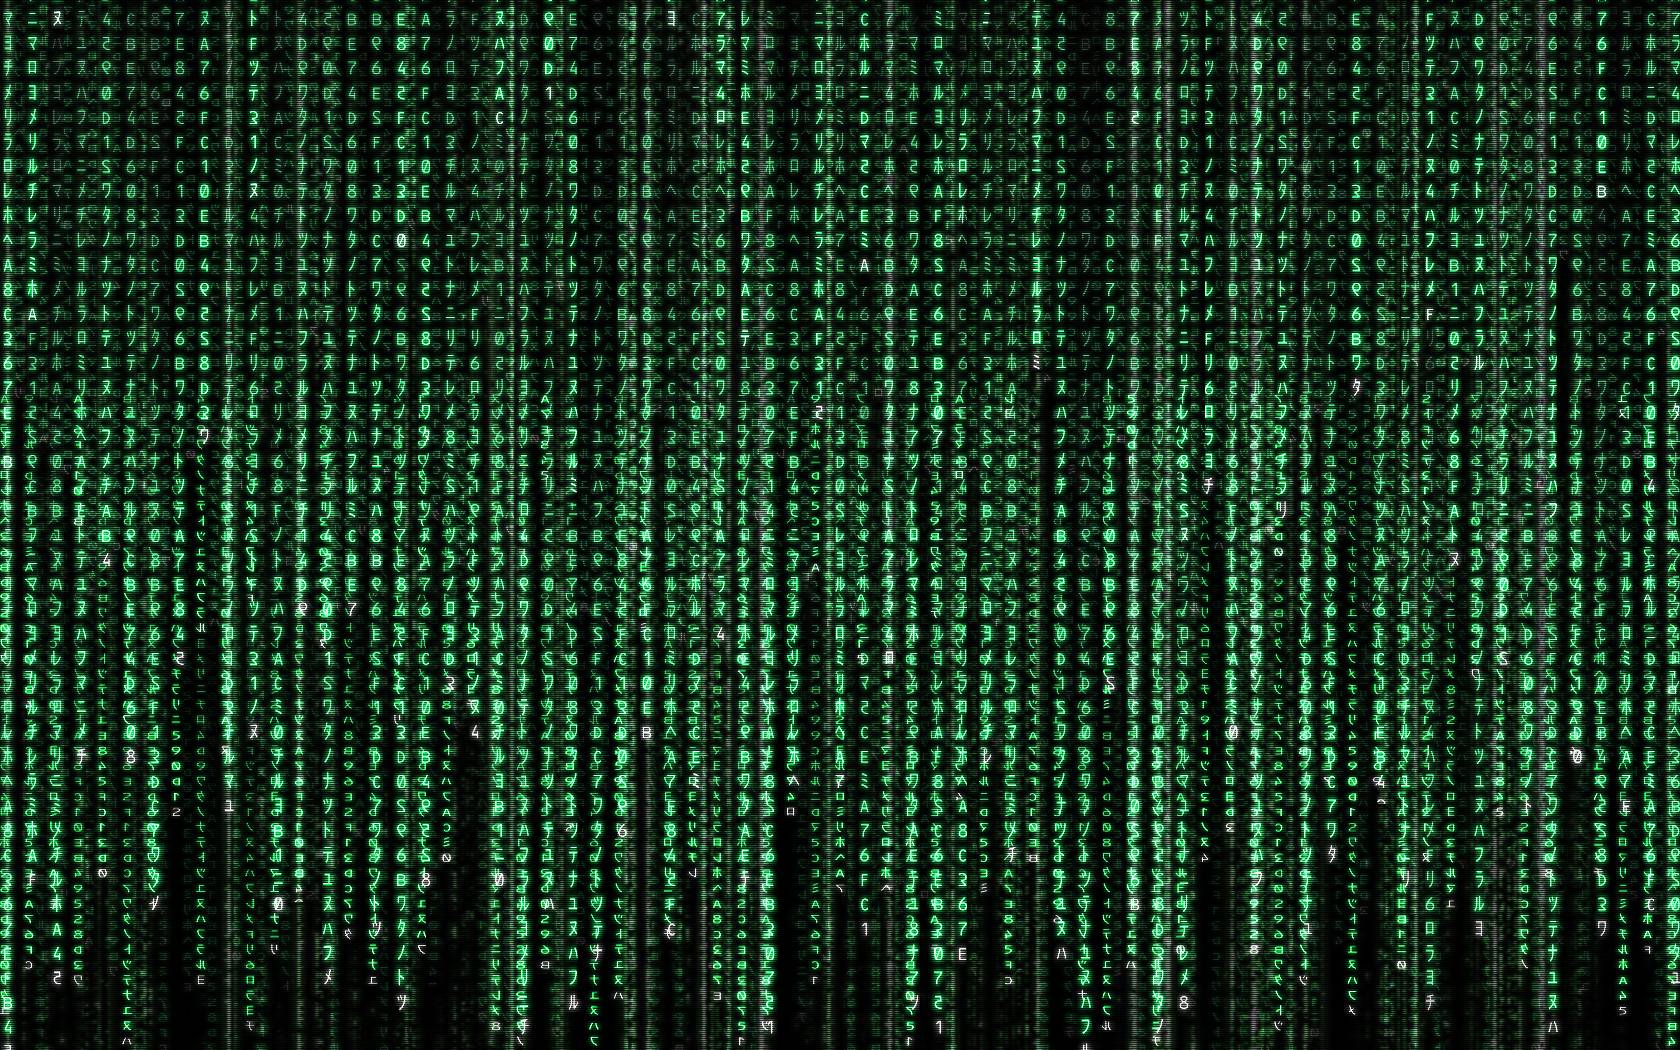 The Matrix Reloaded Wallpapers